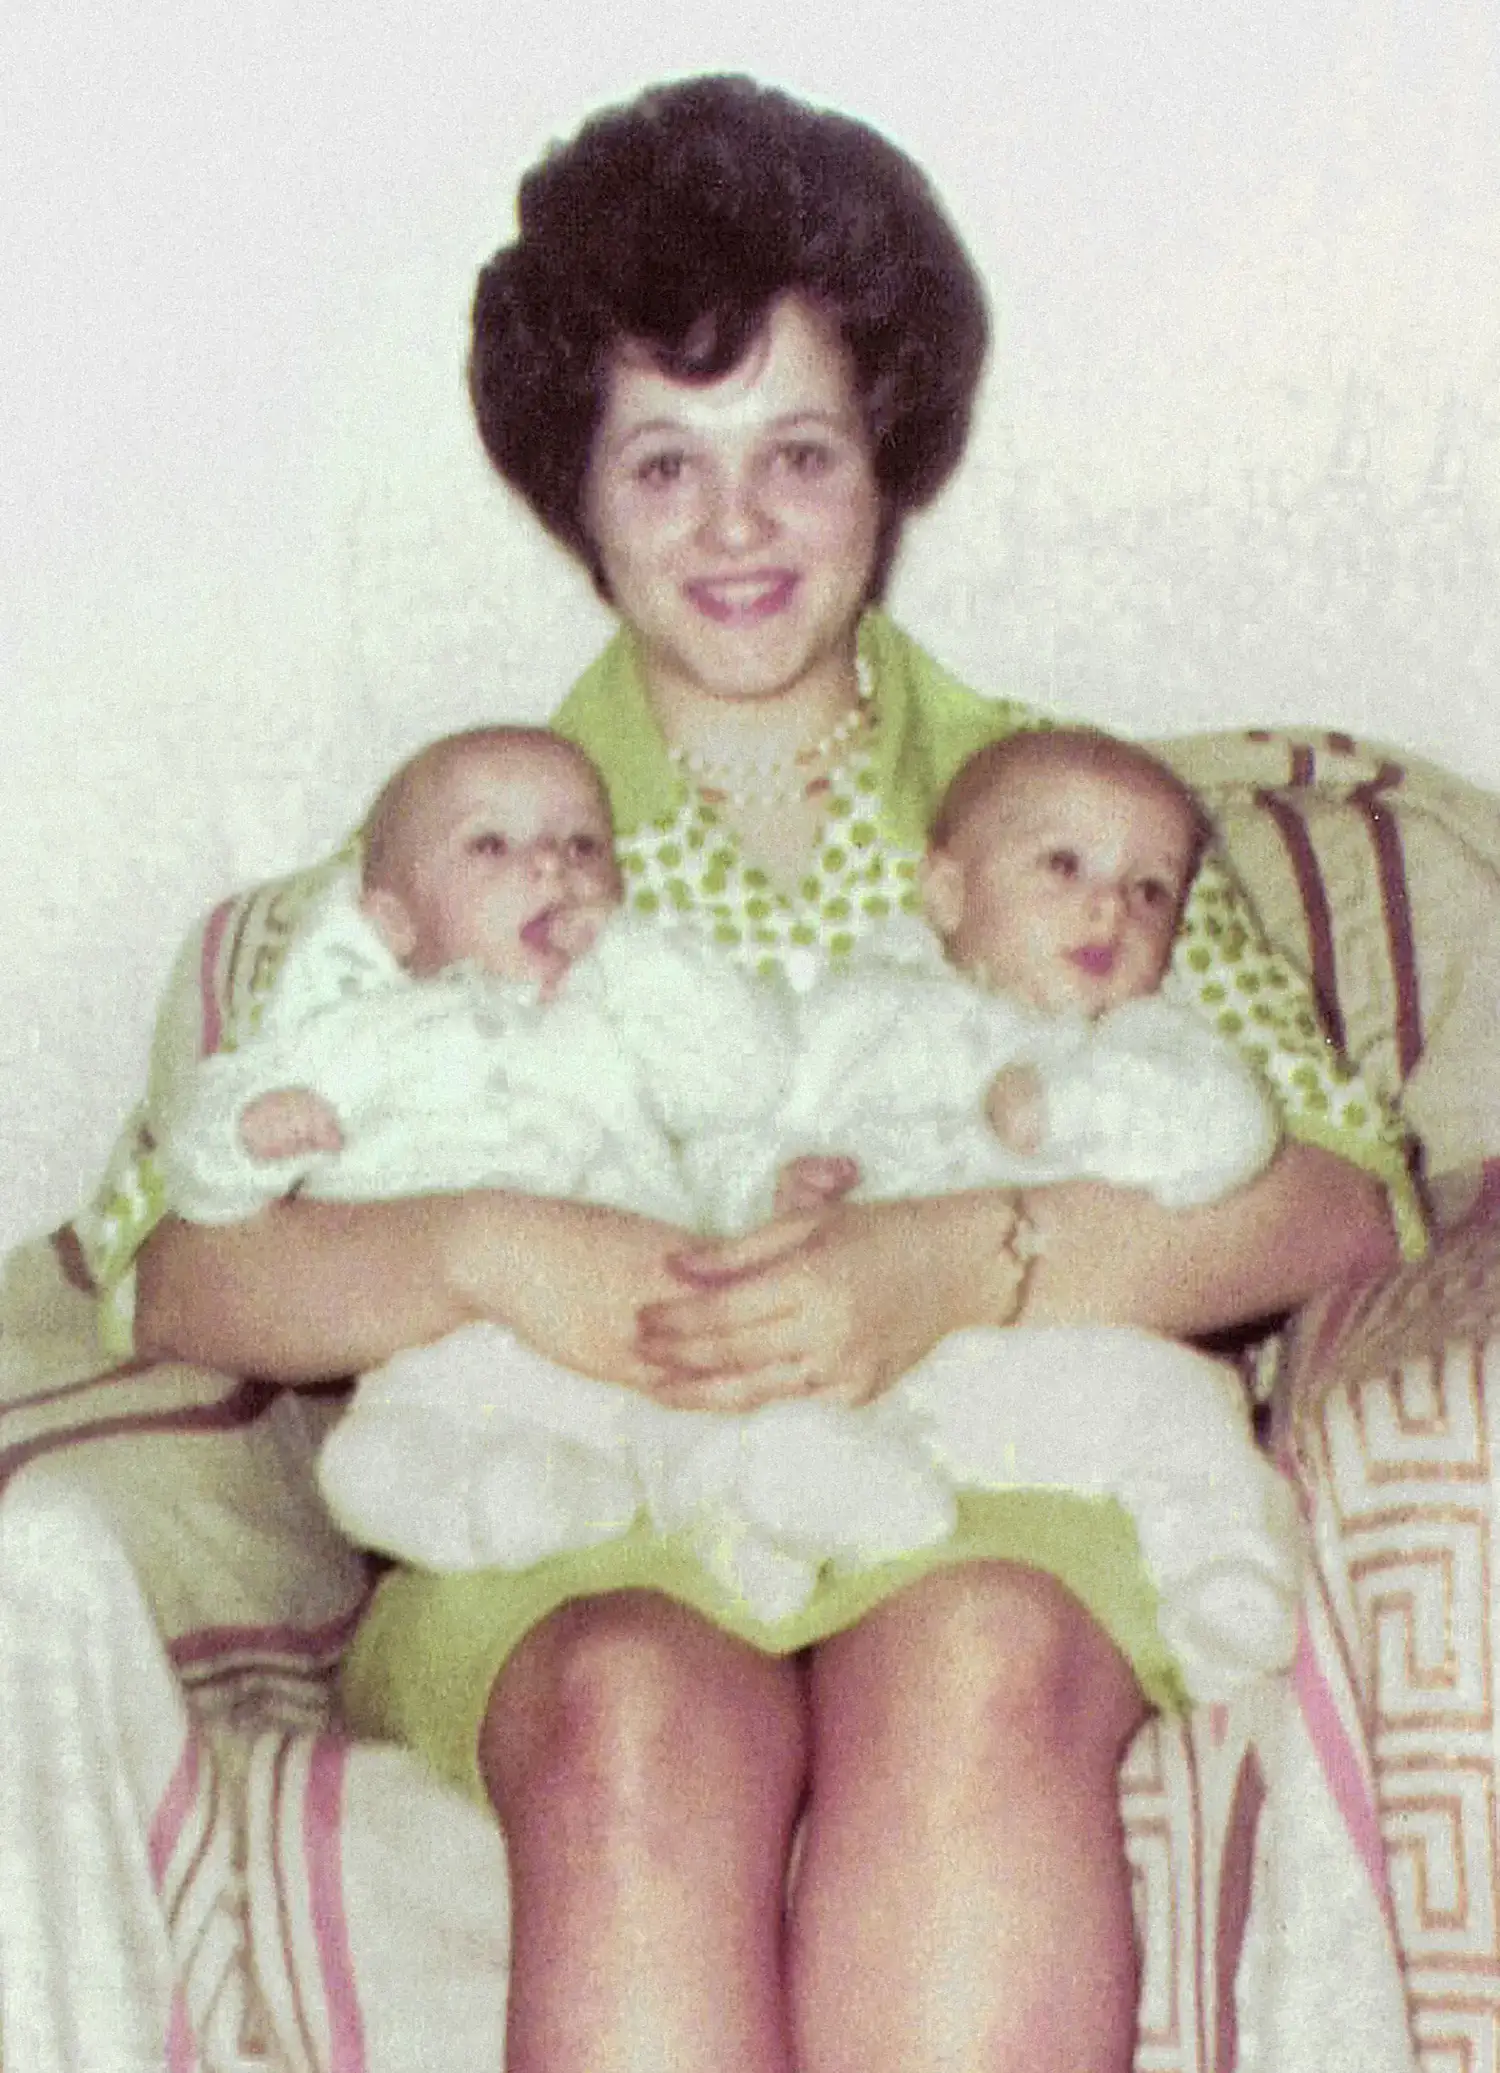 A woman, Janet Reimer, seated on a chair, smiling and holding two babies.